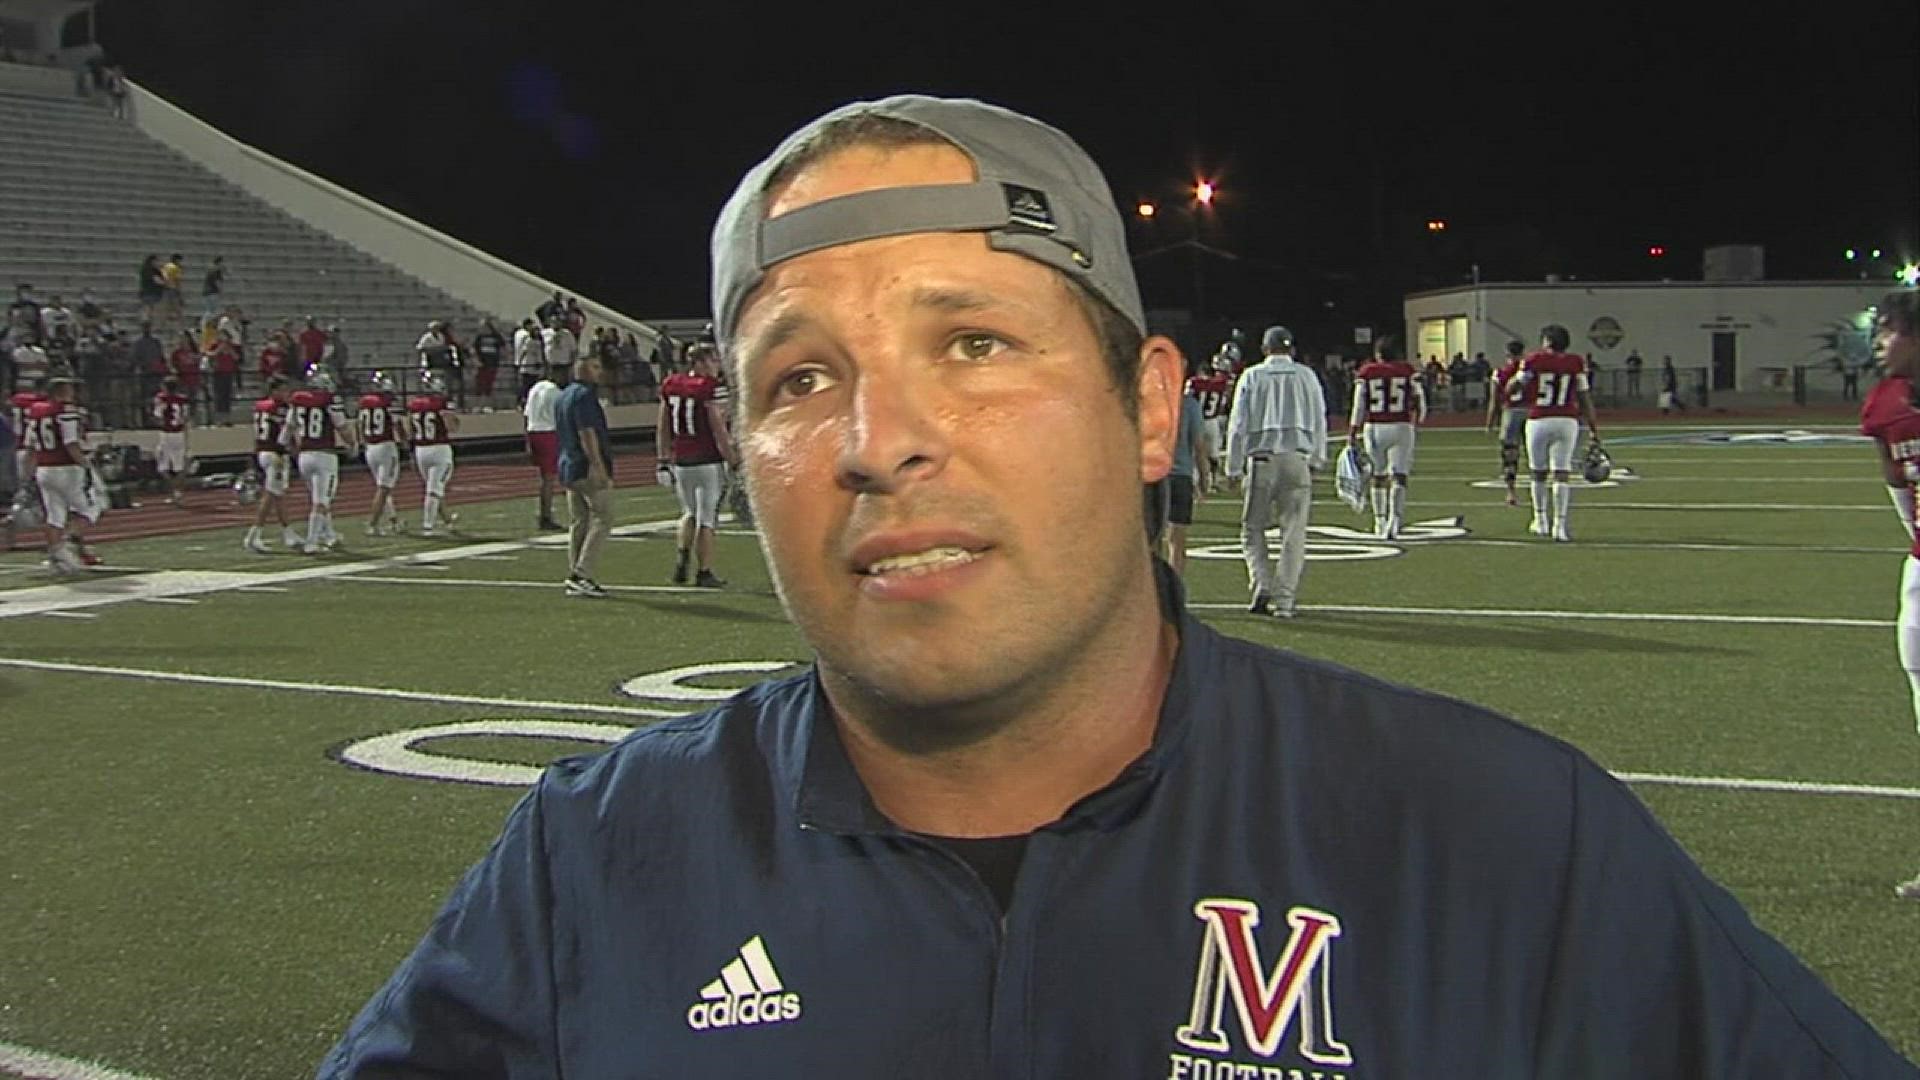 The dominating 62-21 Eagles win was the first for Bitner over Miller as Veterans Memorial Head Coach. Video courtesy: Bally Sports Southwest